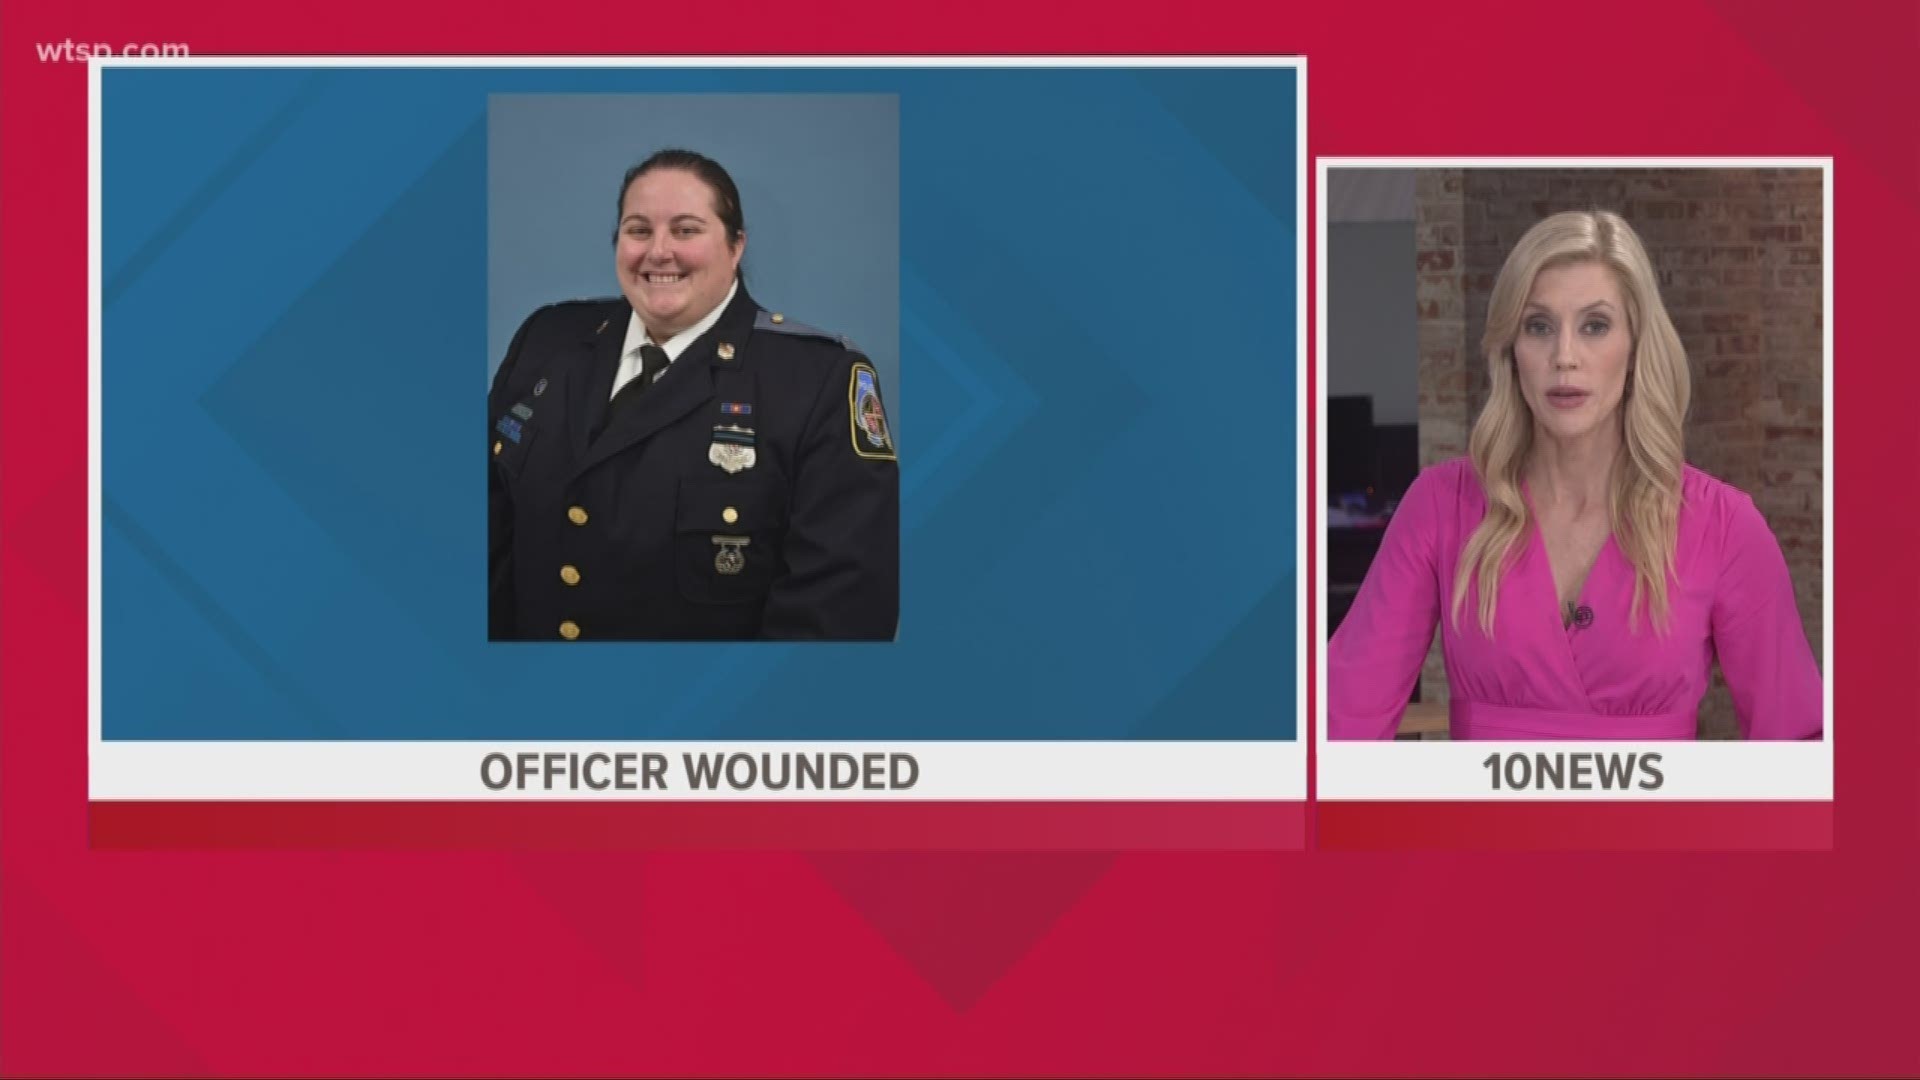 Tabitha Hays, daughter of Chief Bernadette DePino, is an officer in Maryland. She was wounded during a standoff with an armed man, and she had to undergo extensive surgery.